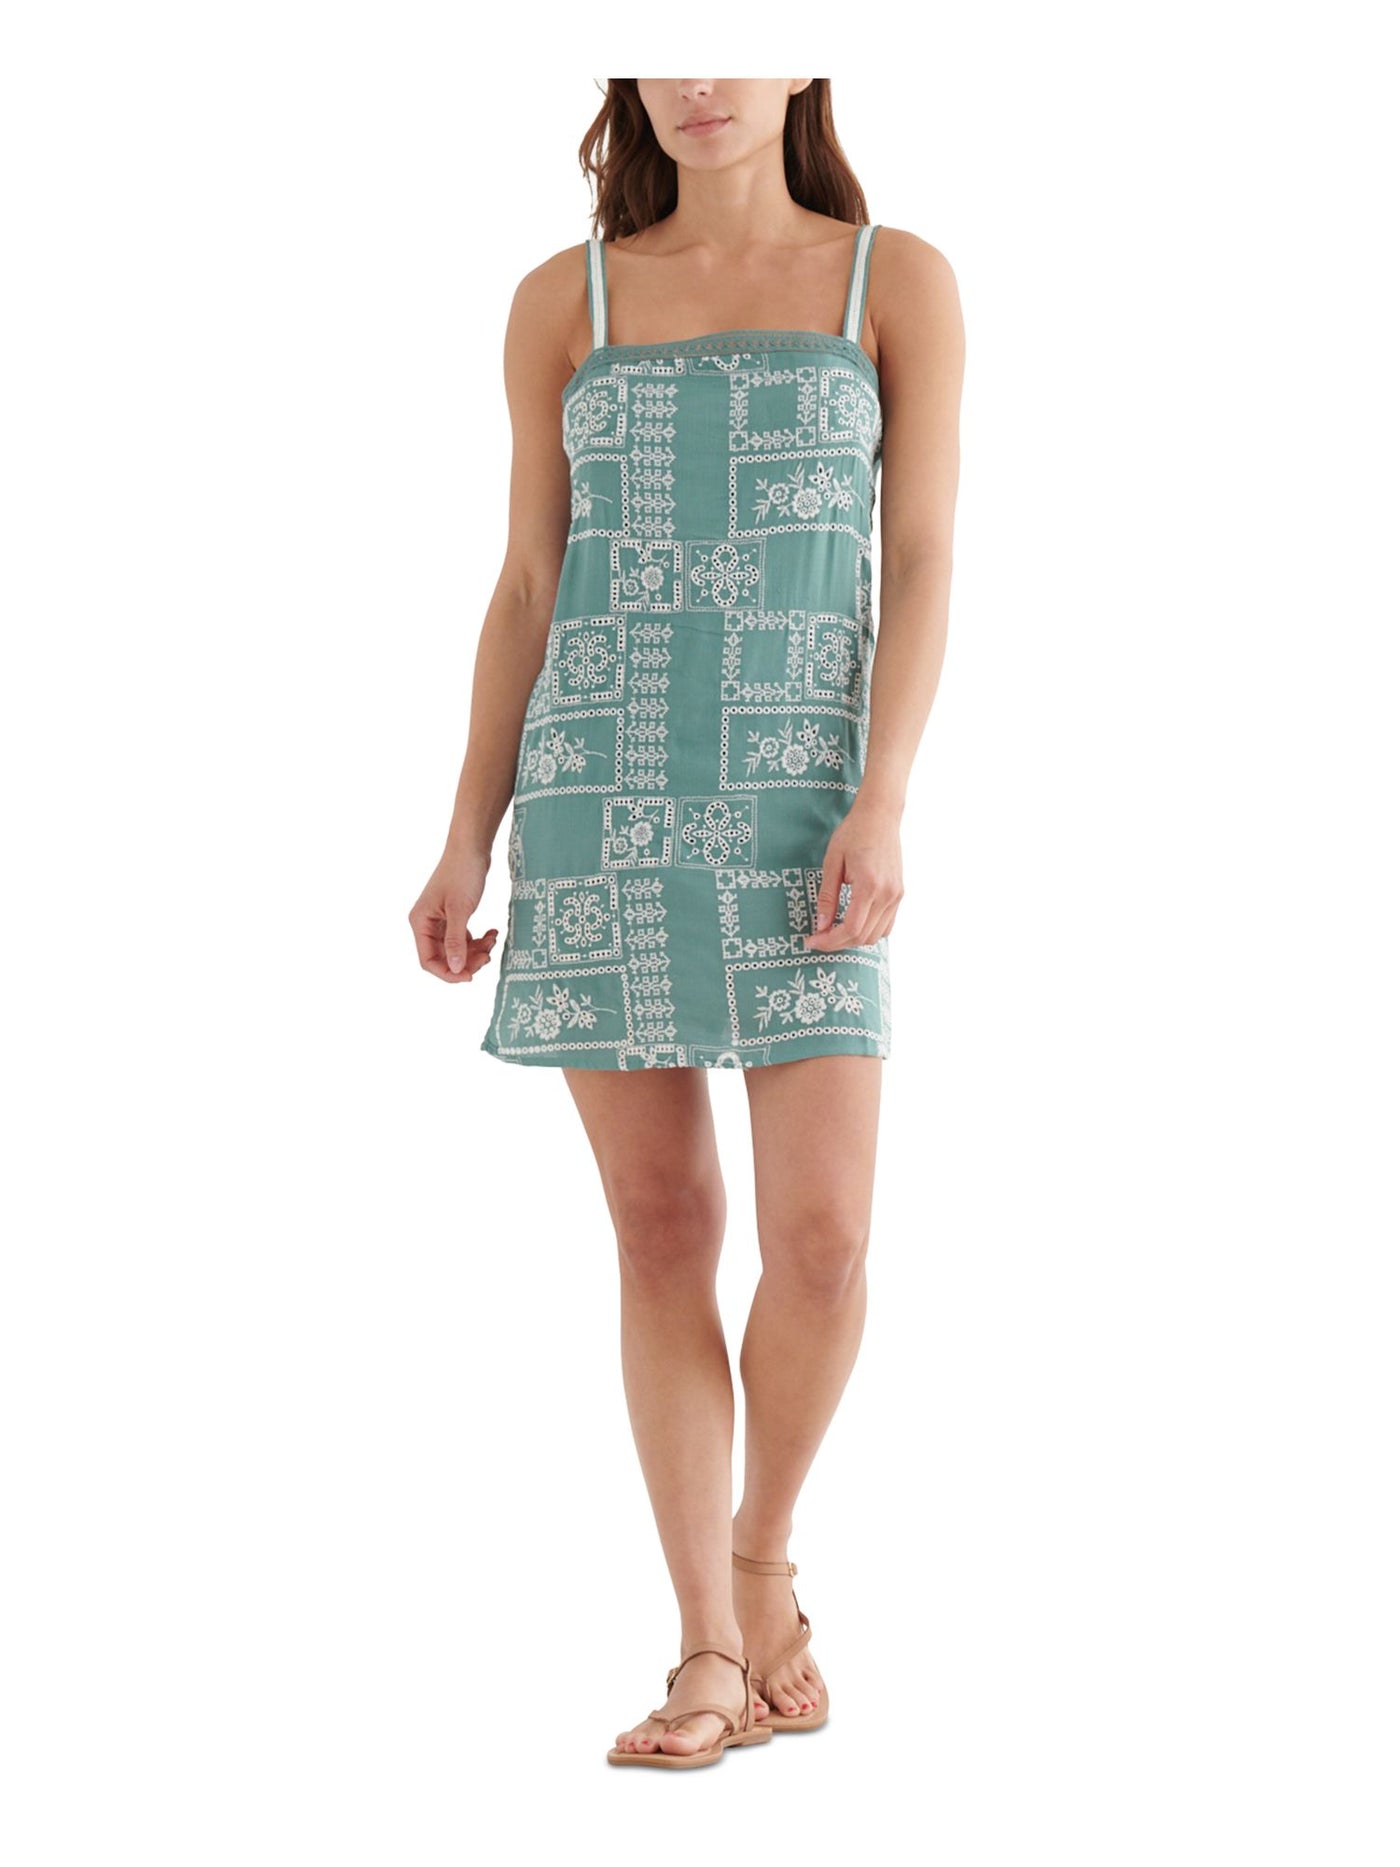 LUCKY BRAND Womens Teal Embroidered Textured Lace Zippered Lined Sleeveless Square Neck Short Shift Dress L